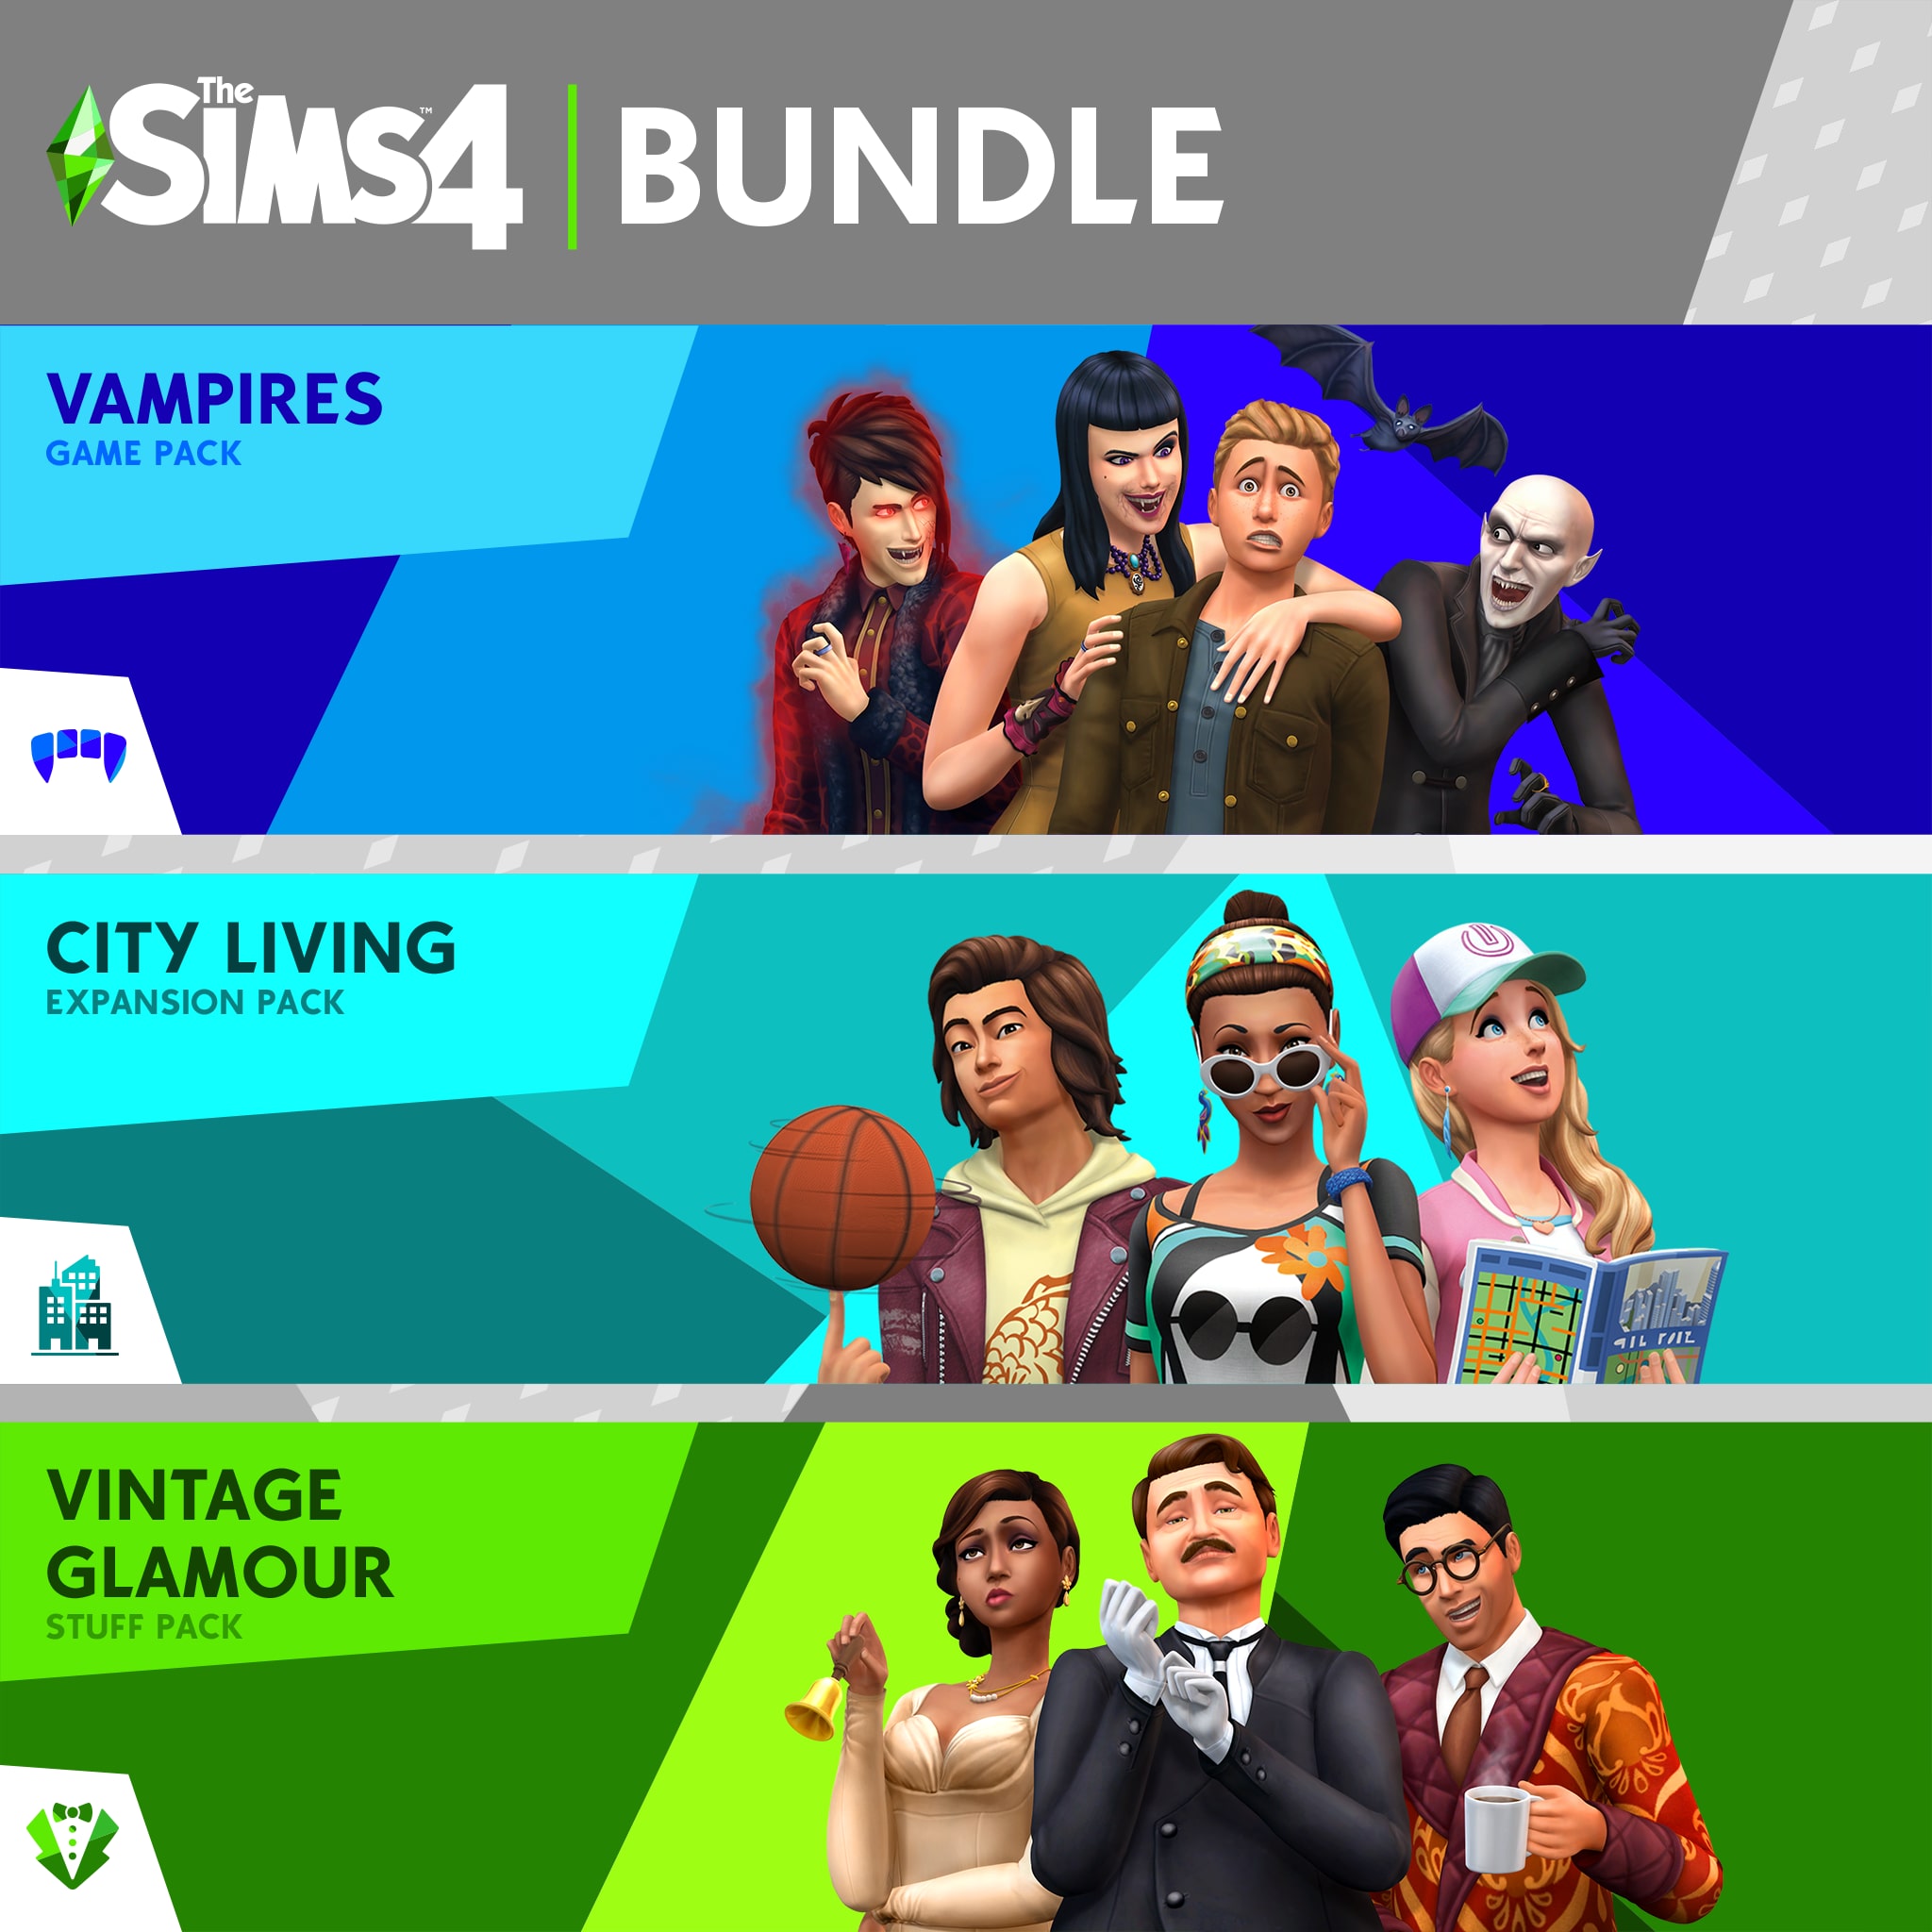 sims 4 ps4 cost